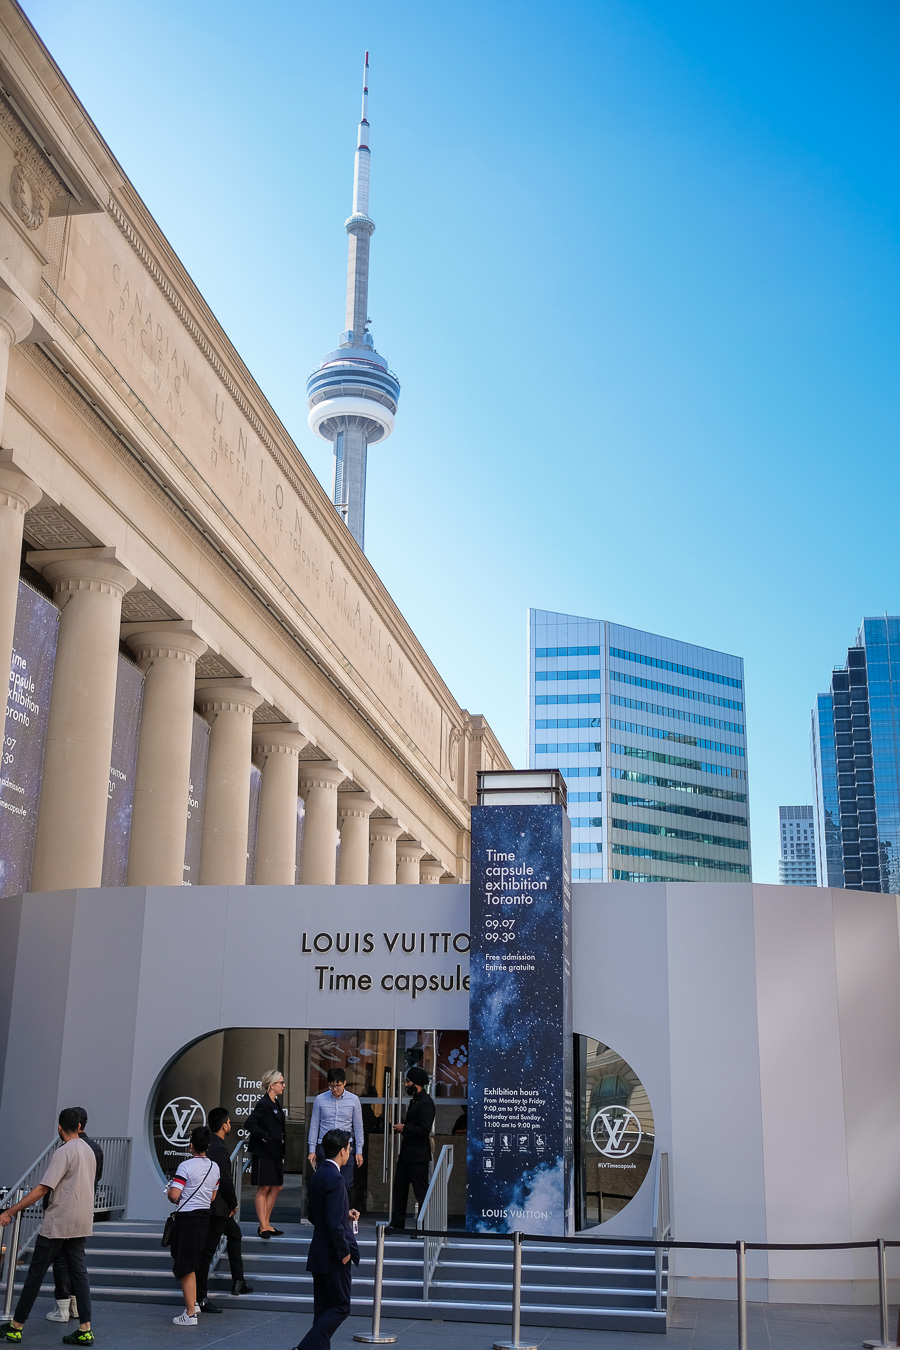 There's a FREE Louis Vuitton exhibit happening in Toronto this